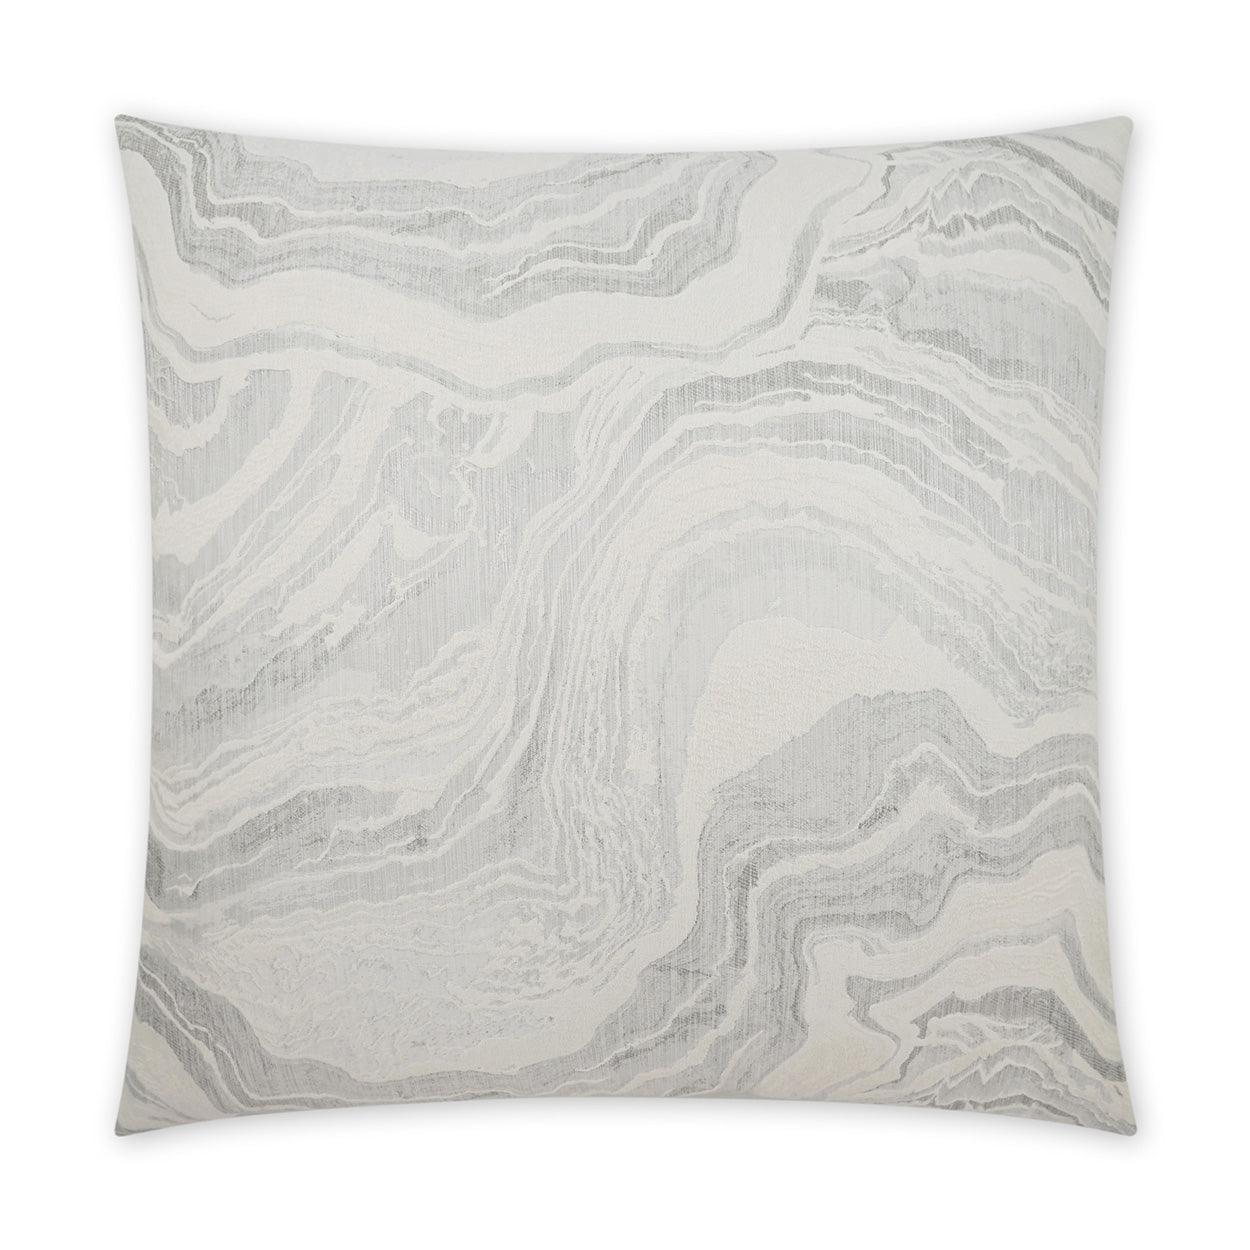 Manon Silver Abstract Glam Silver Large Throw Pillow With Insert - Uptown Sebastian